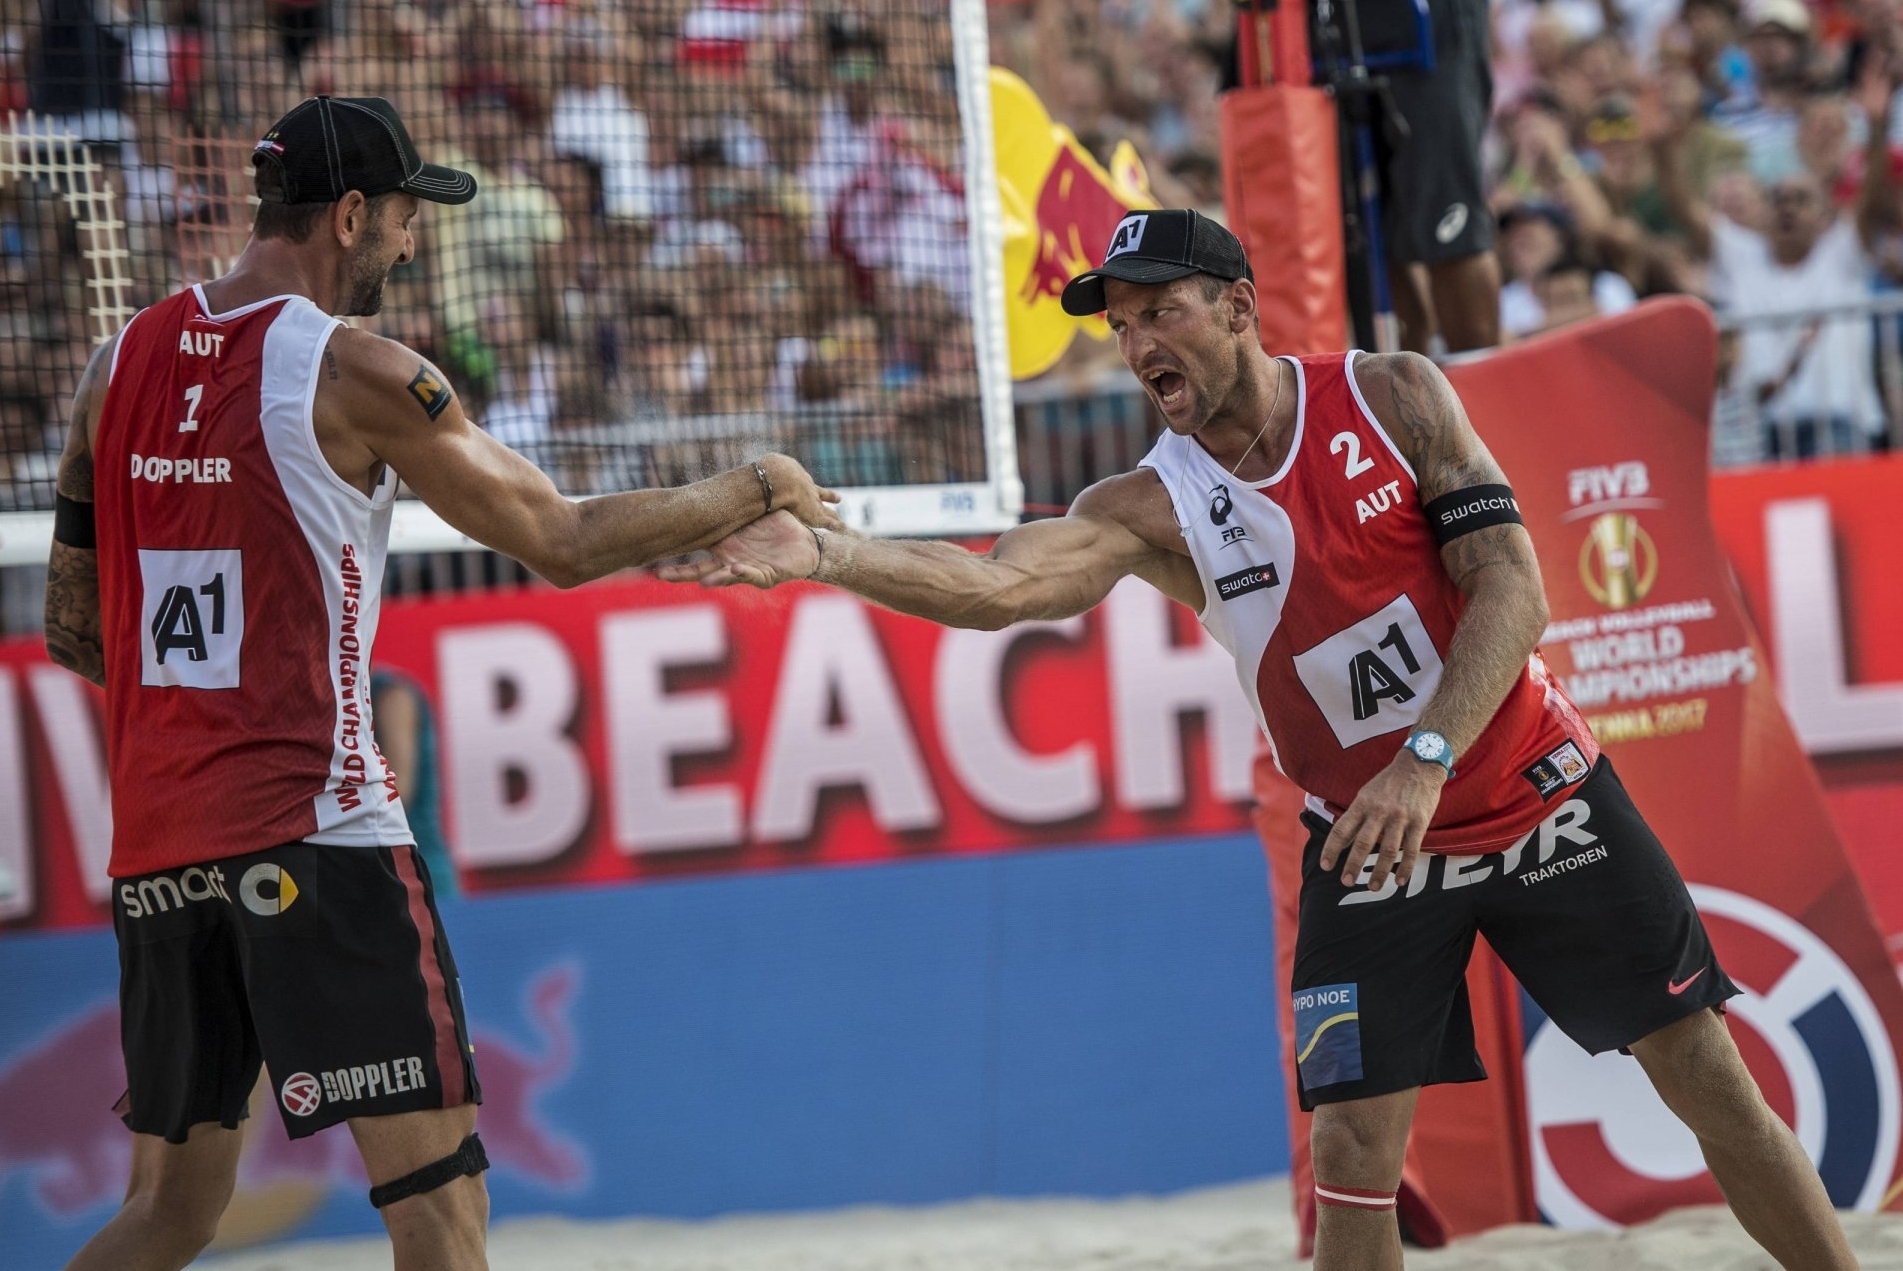 Doppler/Horst of Austria won silver on home sand at the World Champs earlier this month